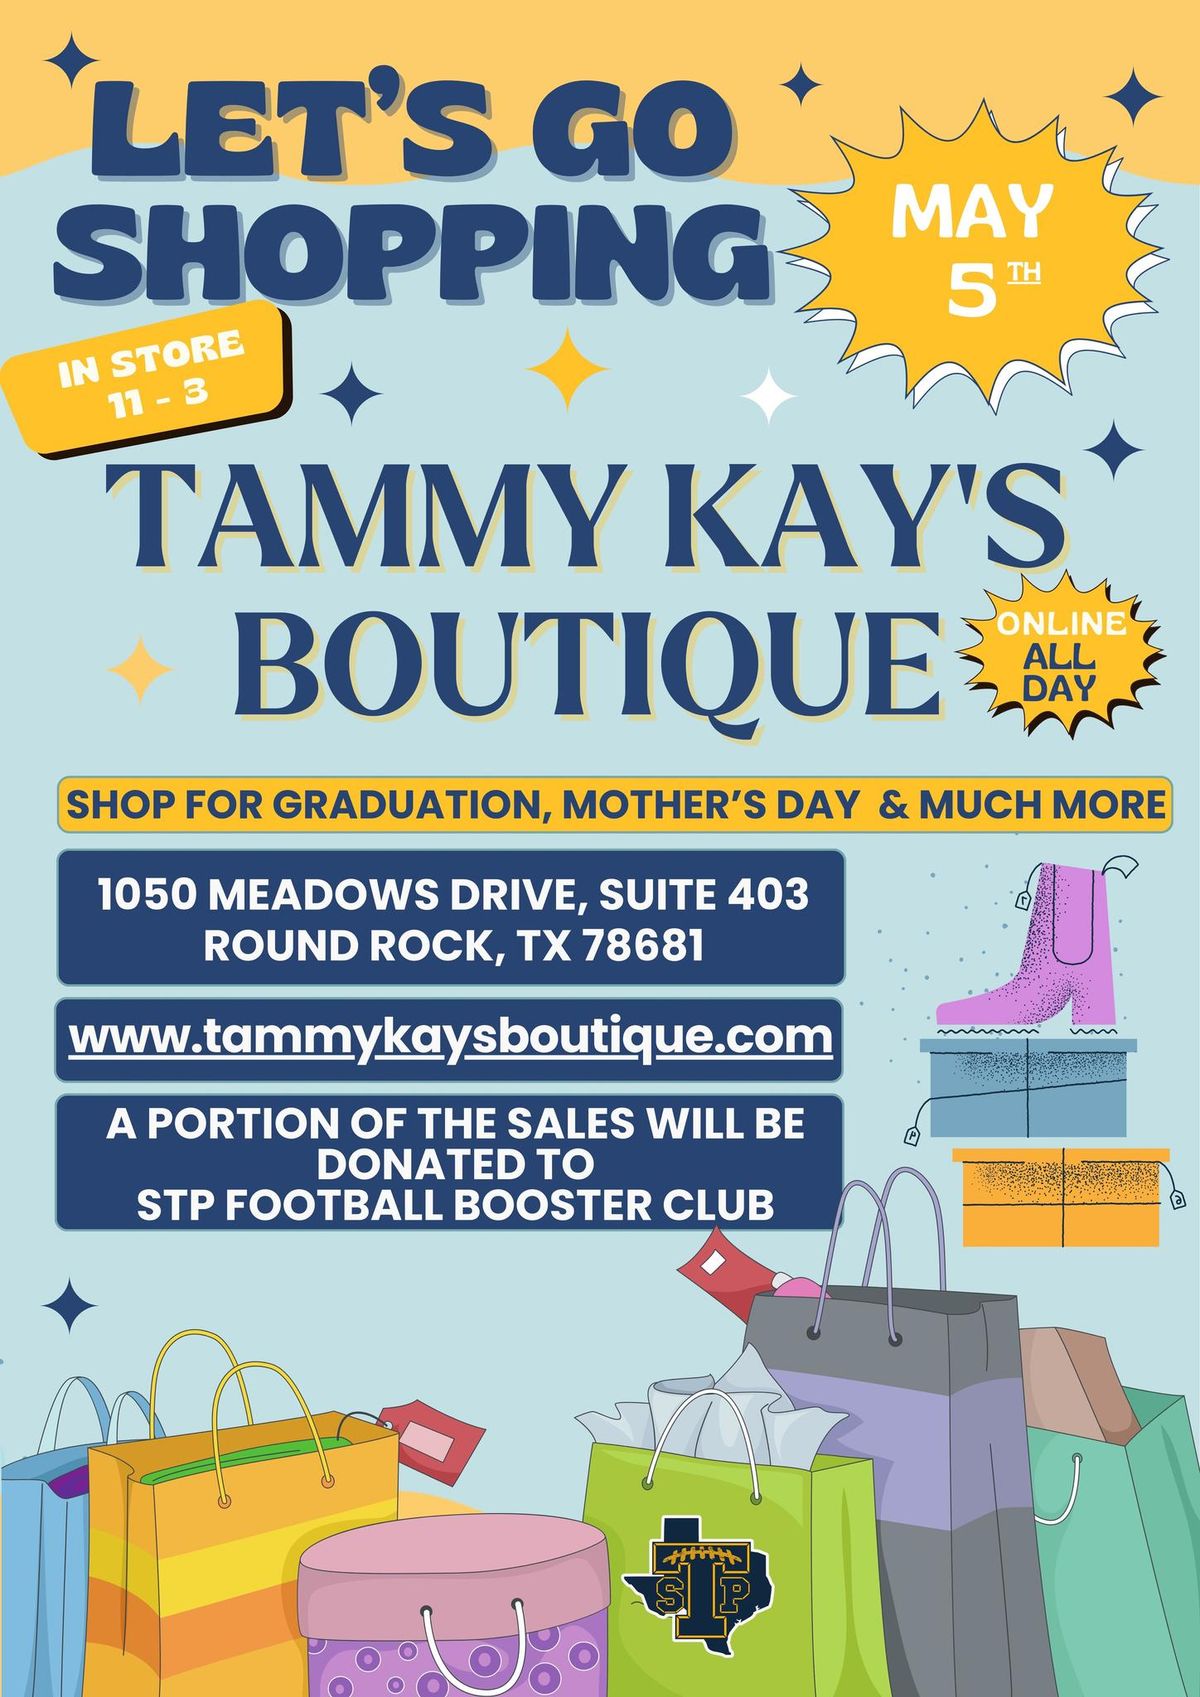 Tammy Kay\u2019s Boutique Fundraising Event for ??